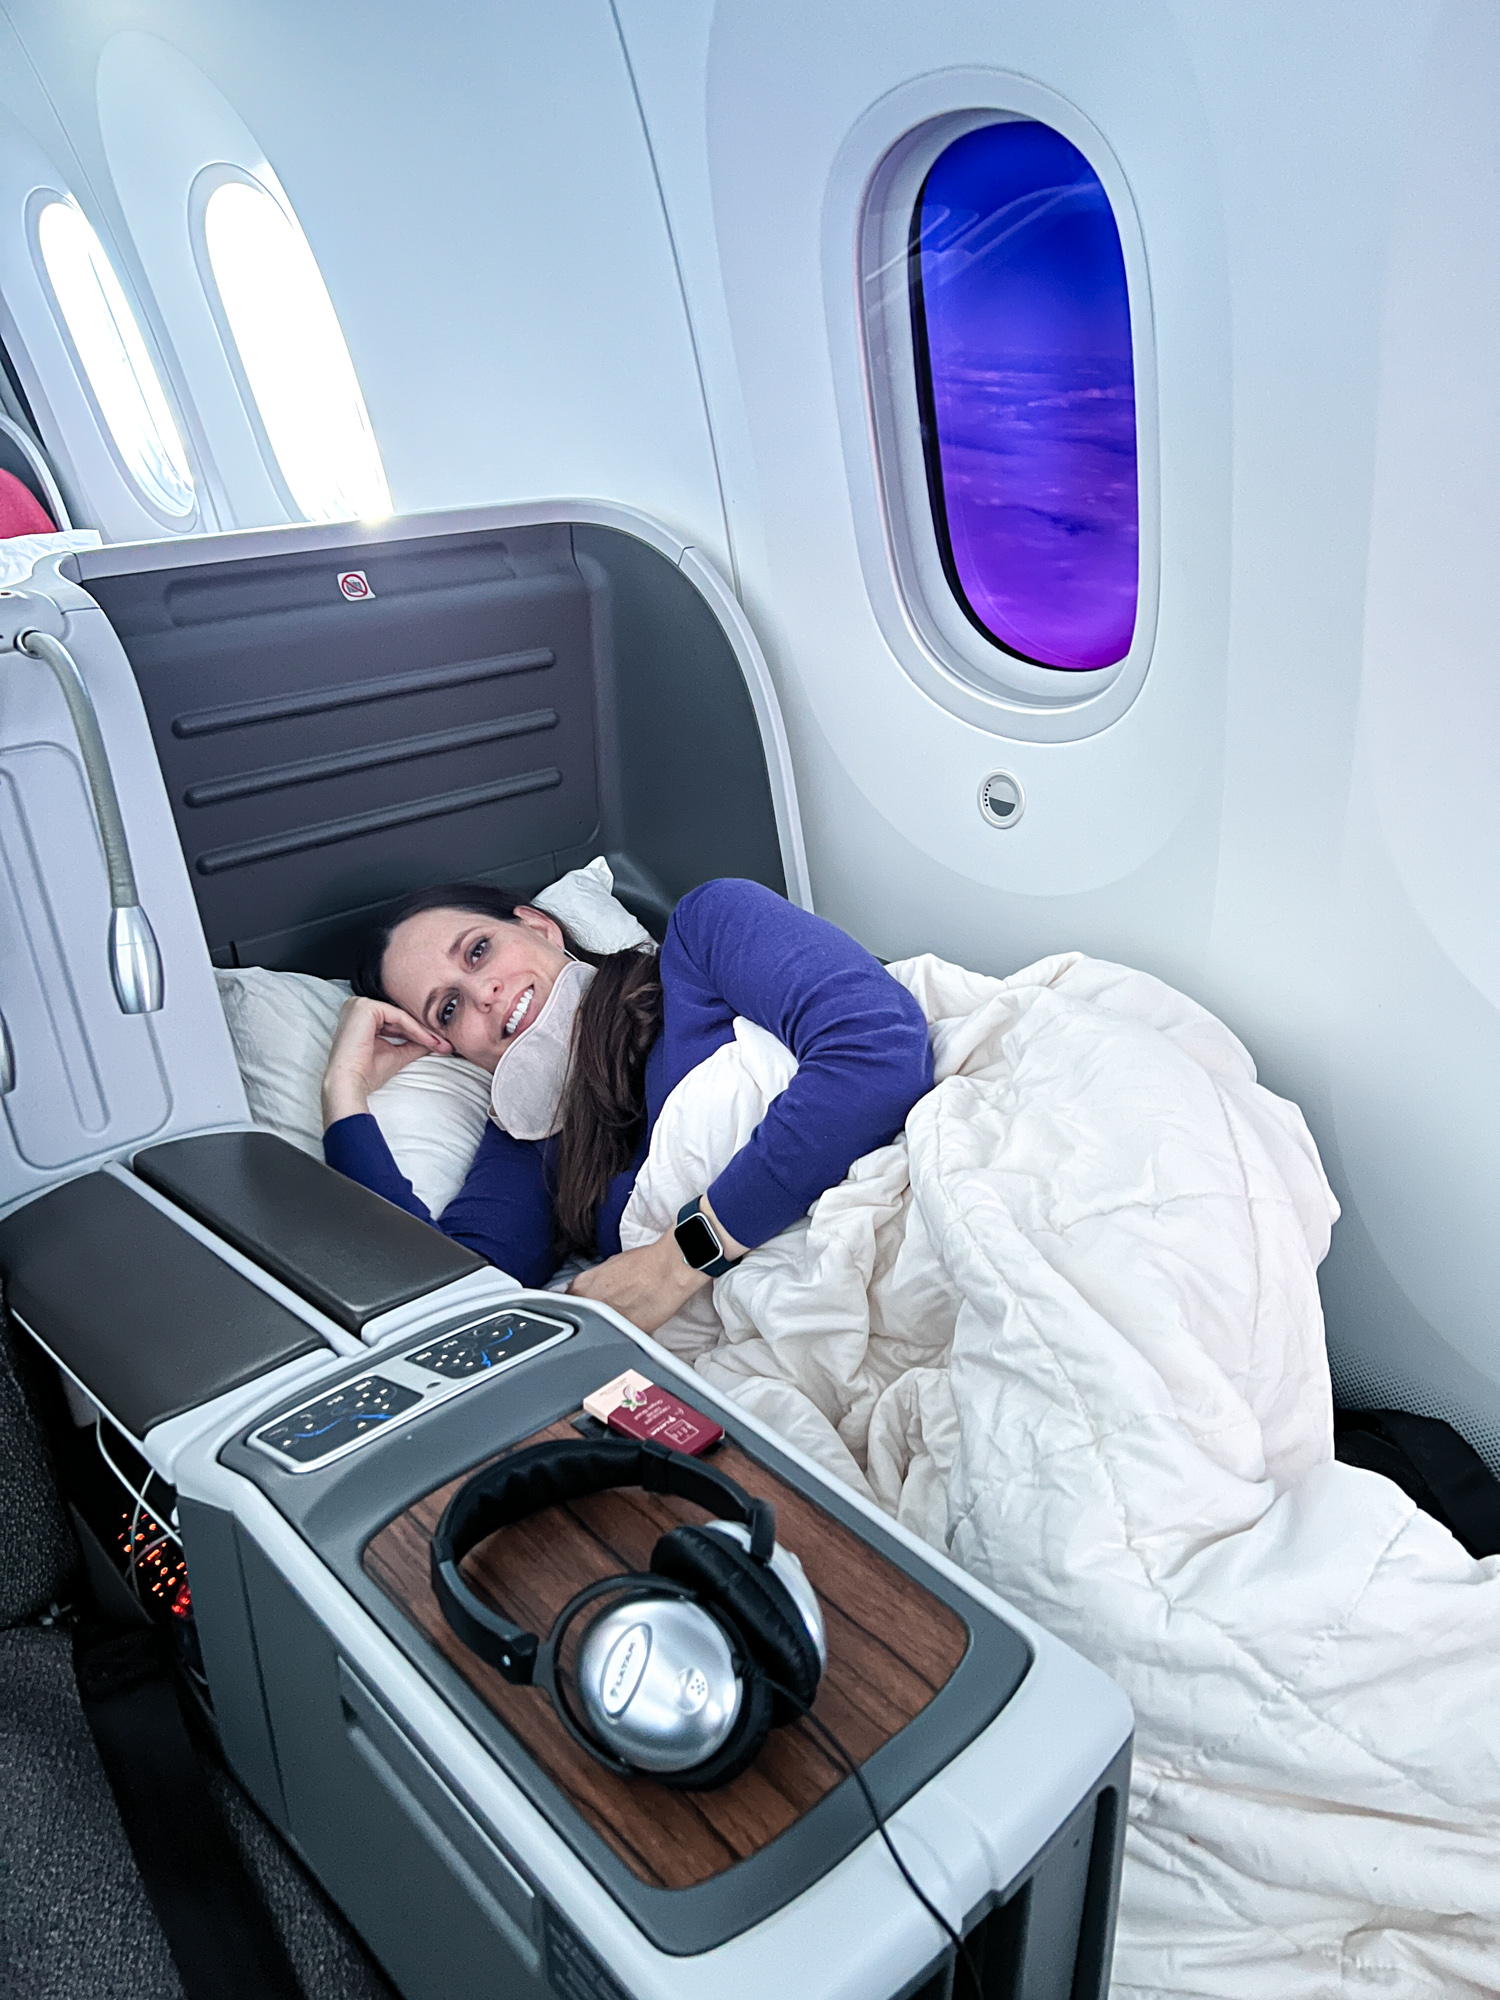 Kel demonstrates the lie-flat seats in LATAM Business Class during our flight to Easter Island.